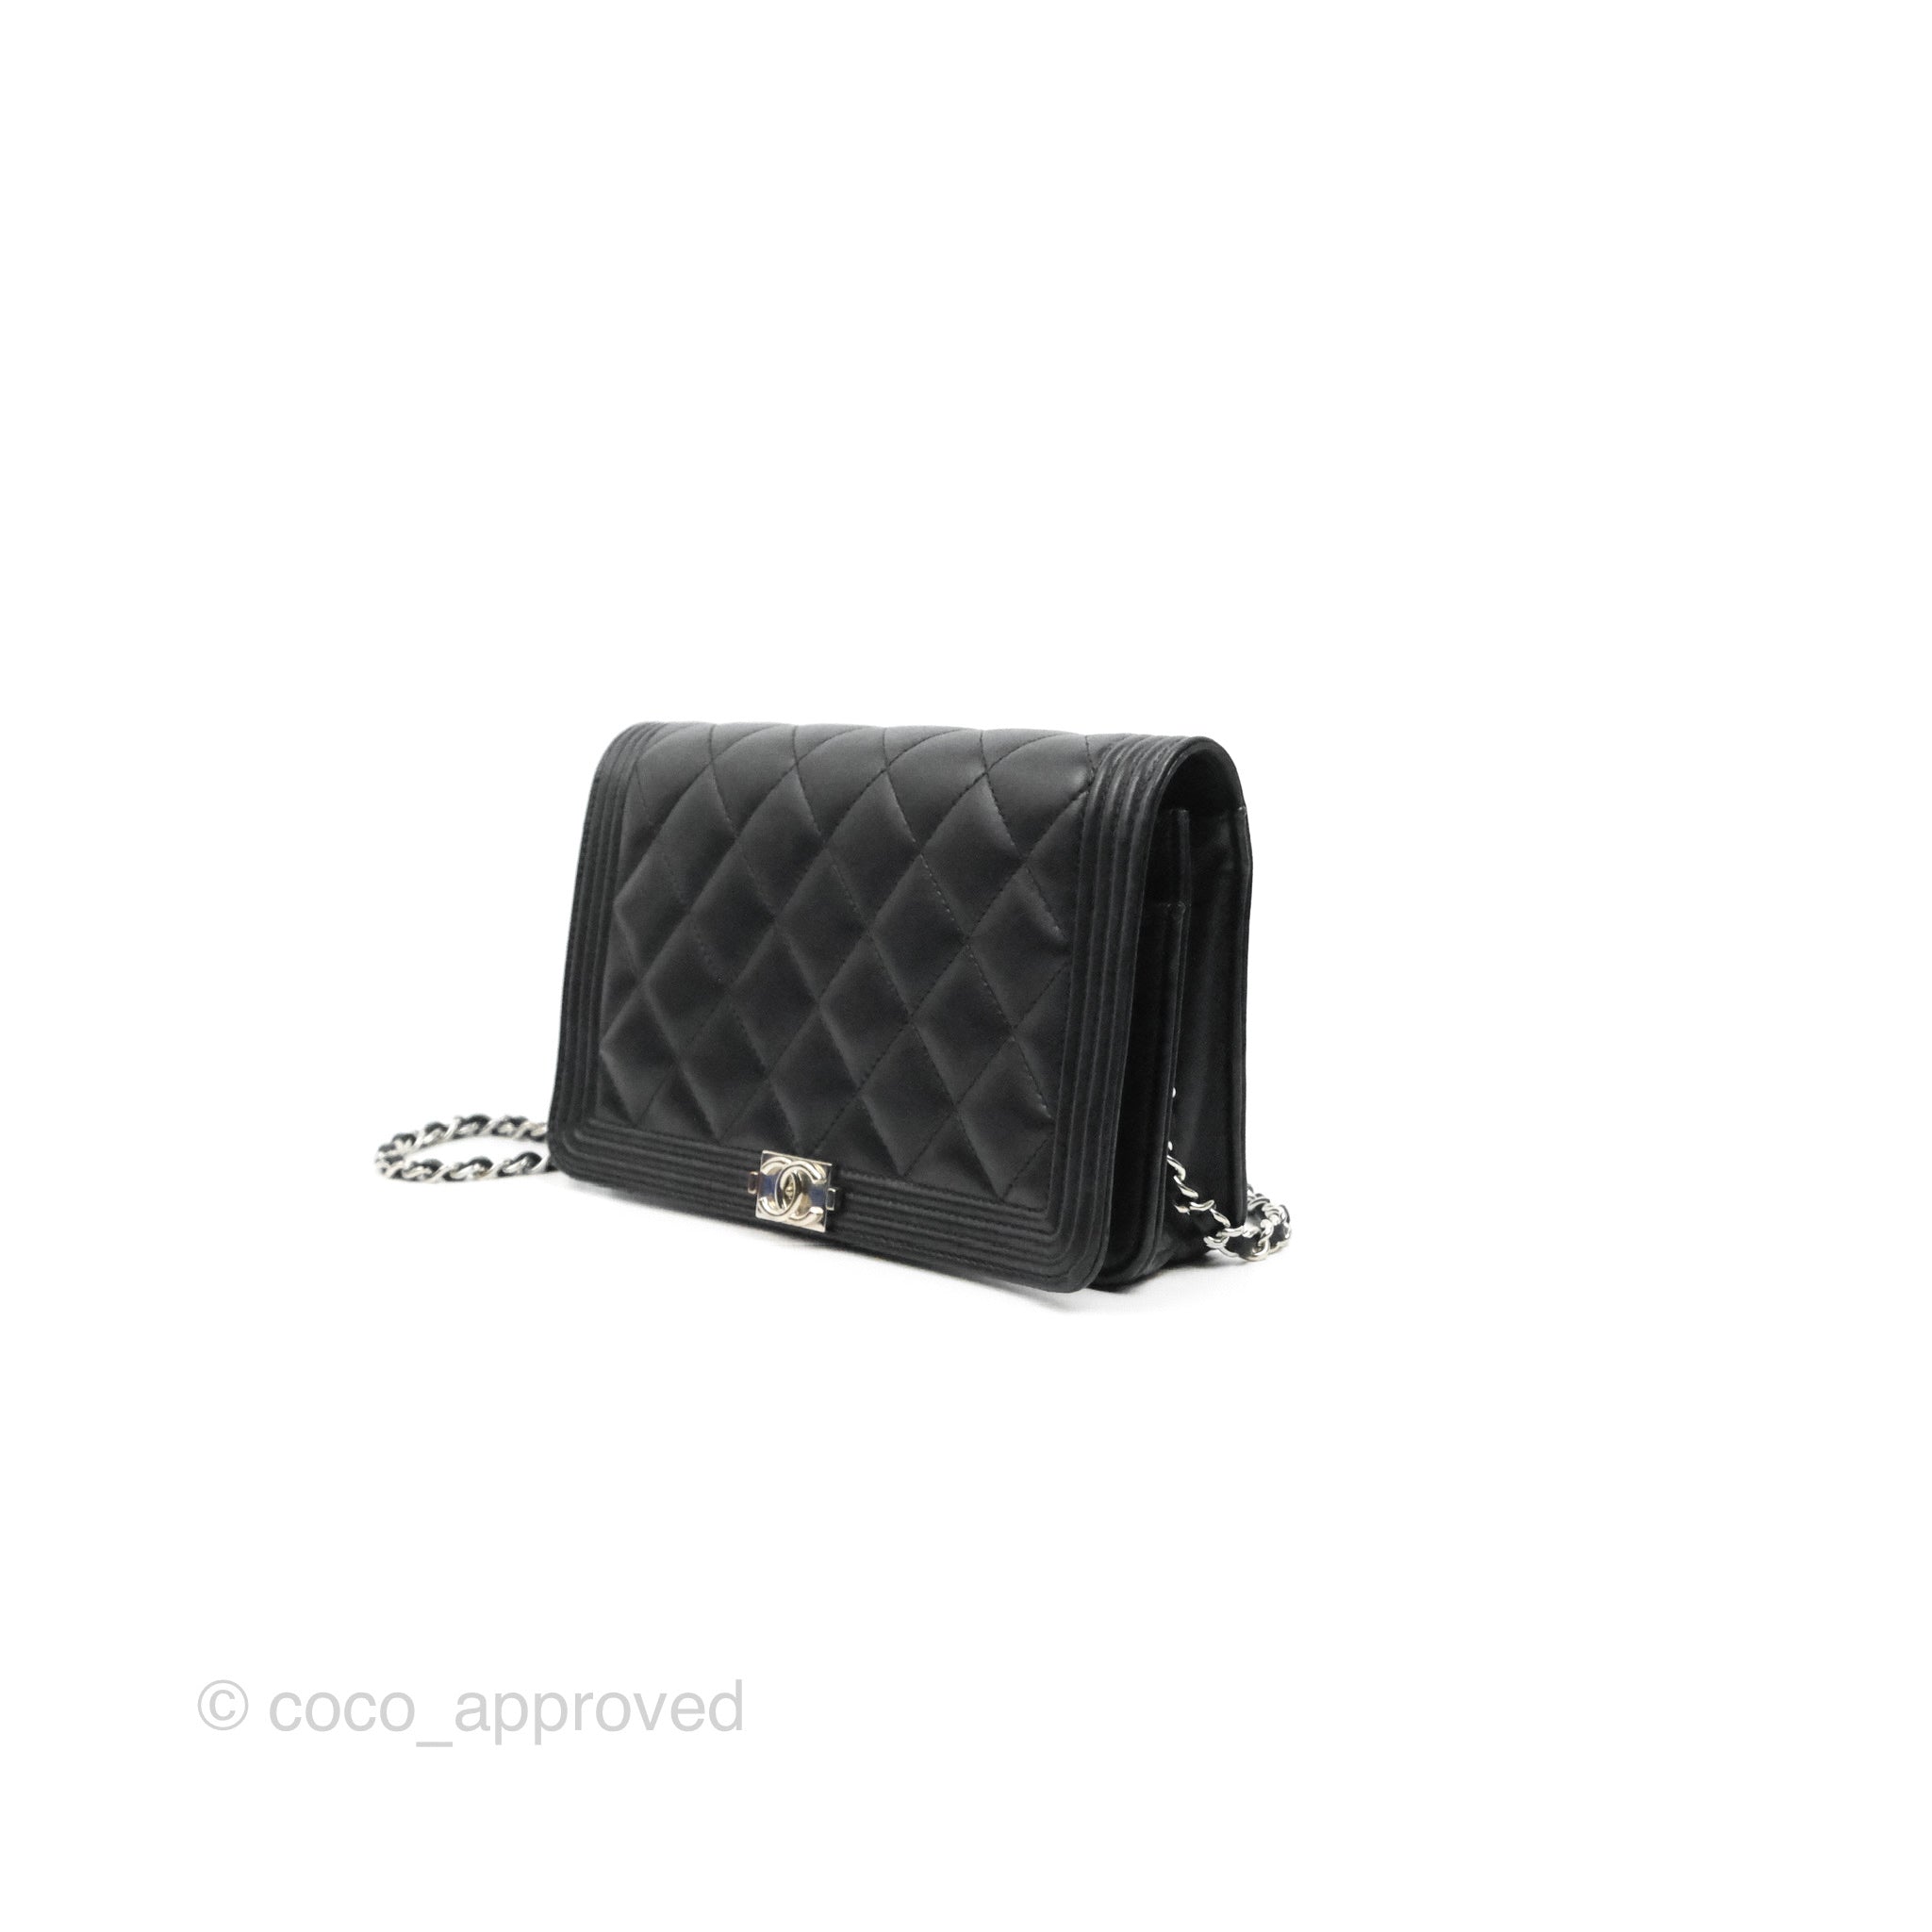 Chanel Book Wallet on Chain Quilted Lambskin Black 236124340